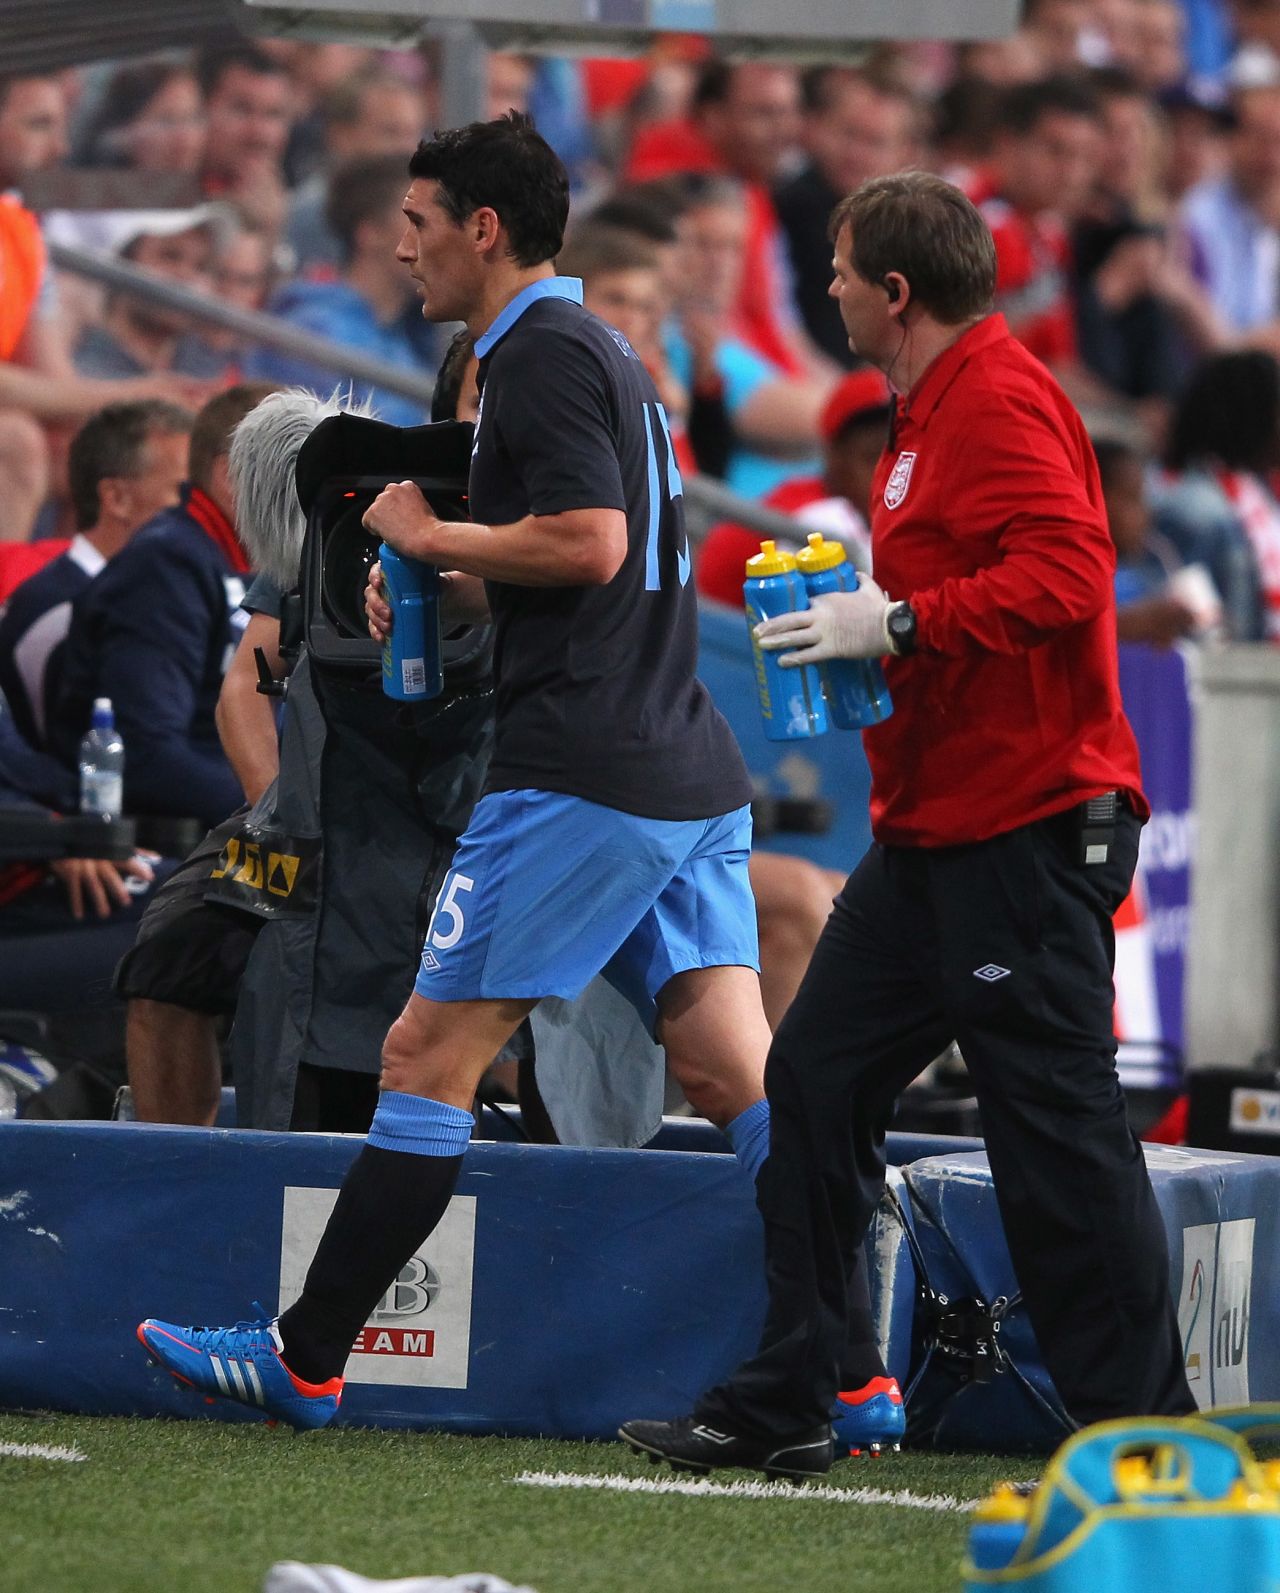 Gareth Barry was the first England player to drop out of Roy Hodgson's England squad for Euro 2012 after injuring his groin in the friendly win over Norway.